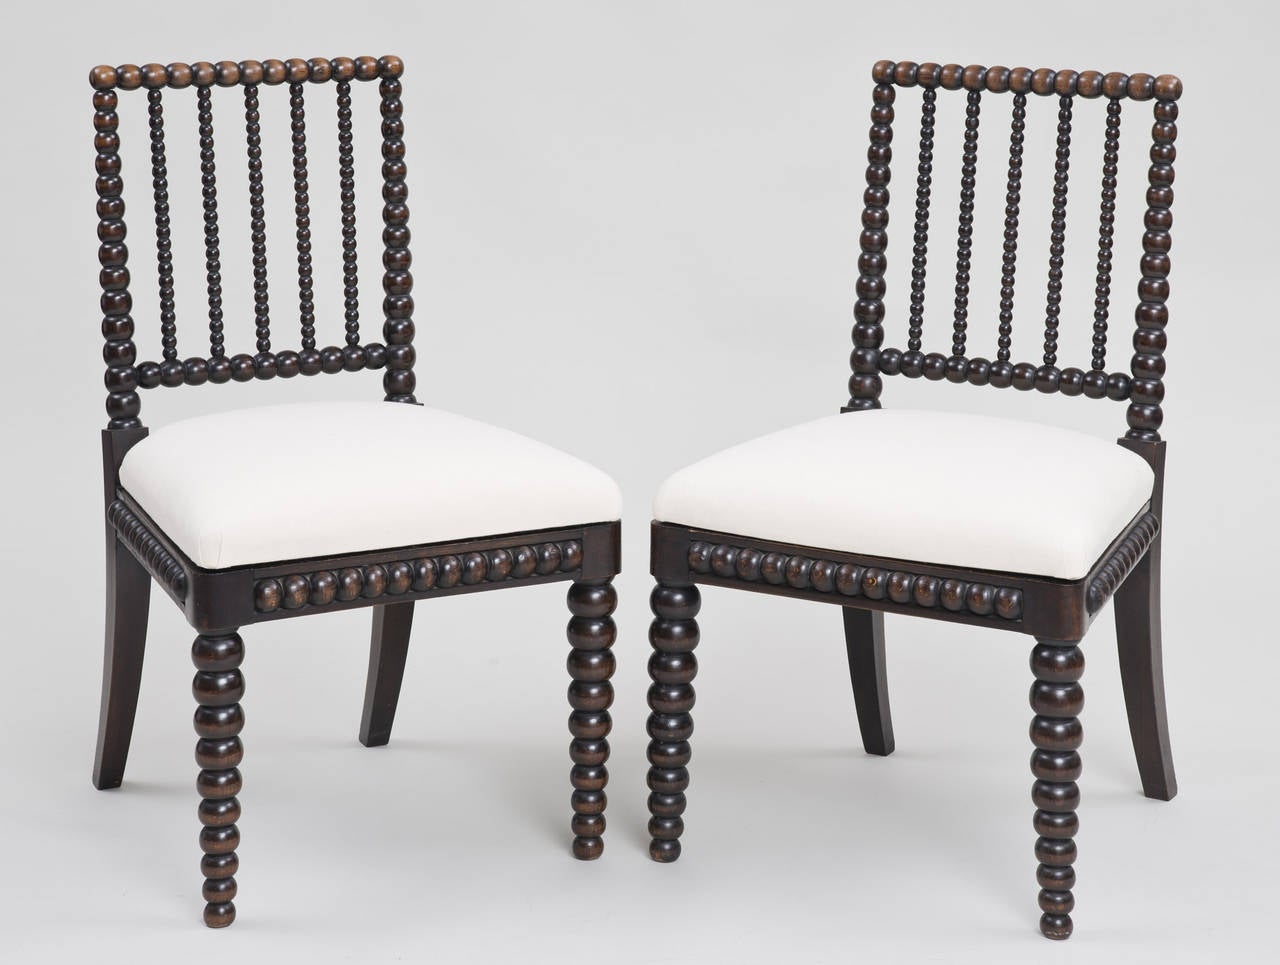 Pair of Regency ebonized bobbin-turned side chairs with lovely faded patina on the top rail, bobbin-turning also on the apron, upholstered removable seats in heavy white cotton fabric.

Item #7364.